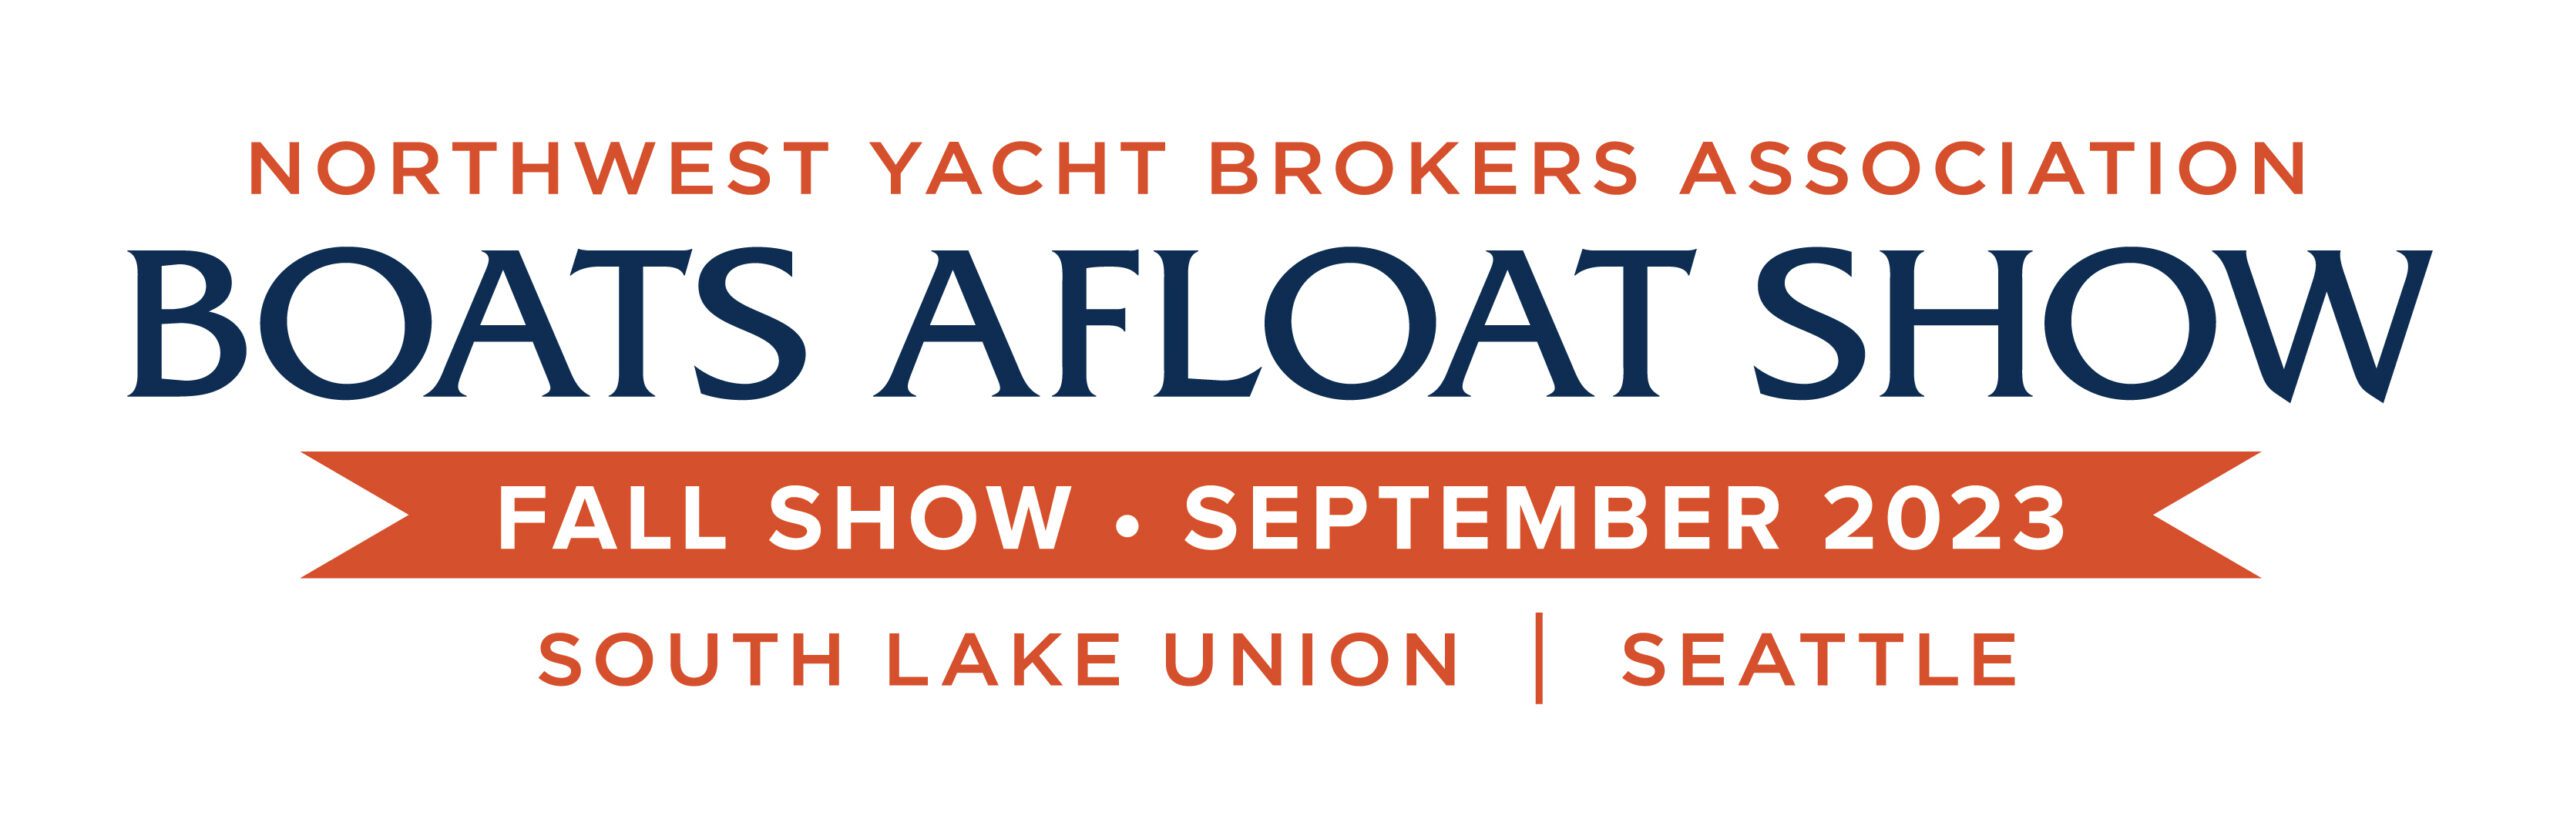 FALL BOATS AFLOAT SHOW SEPTEMBER 14 -17, 2023